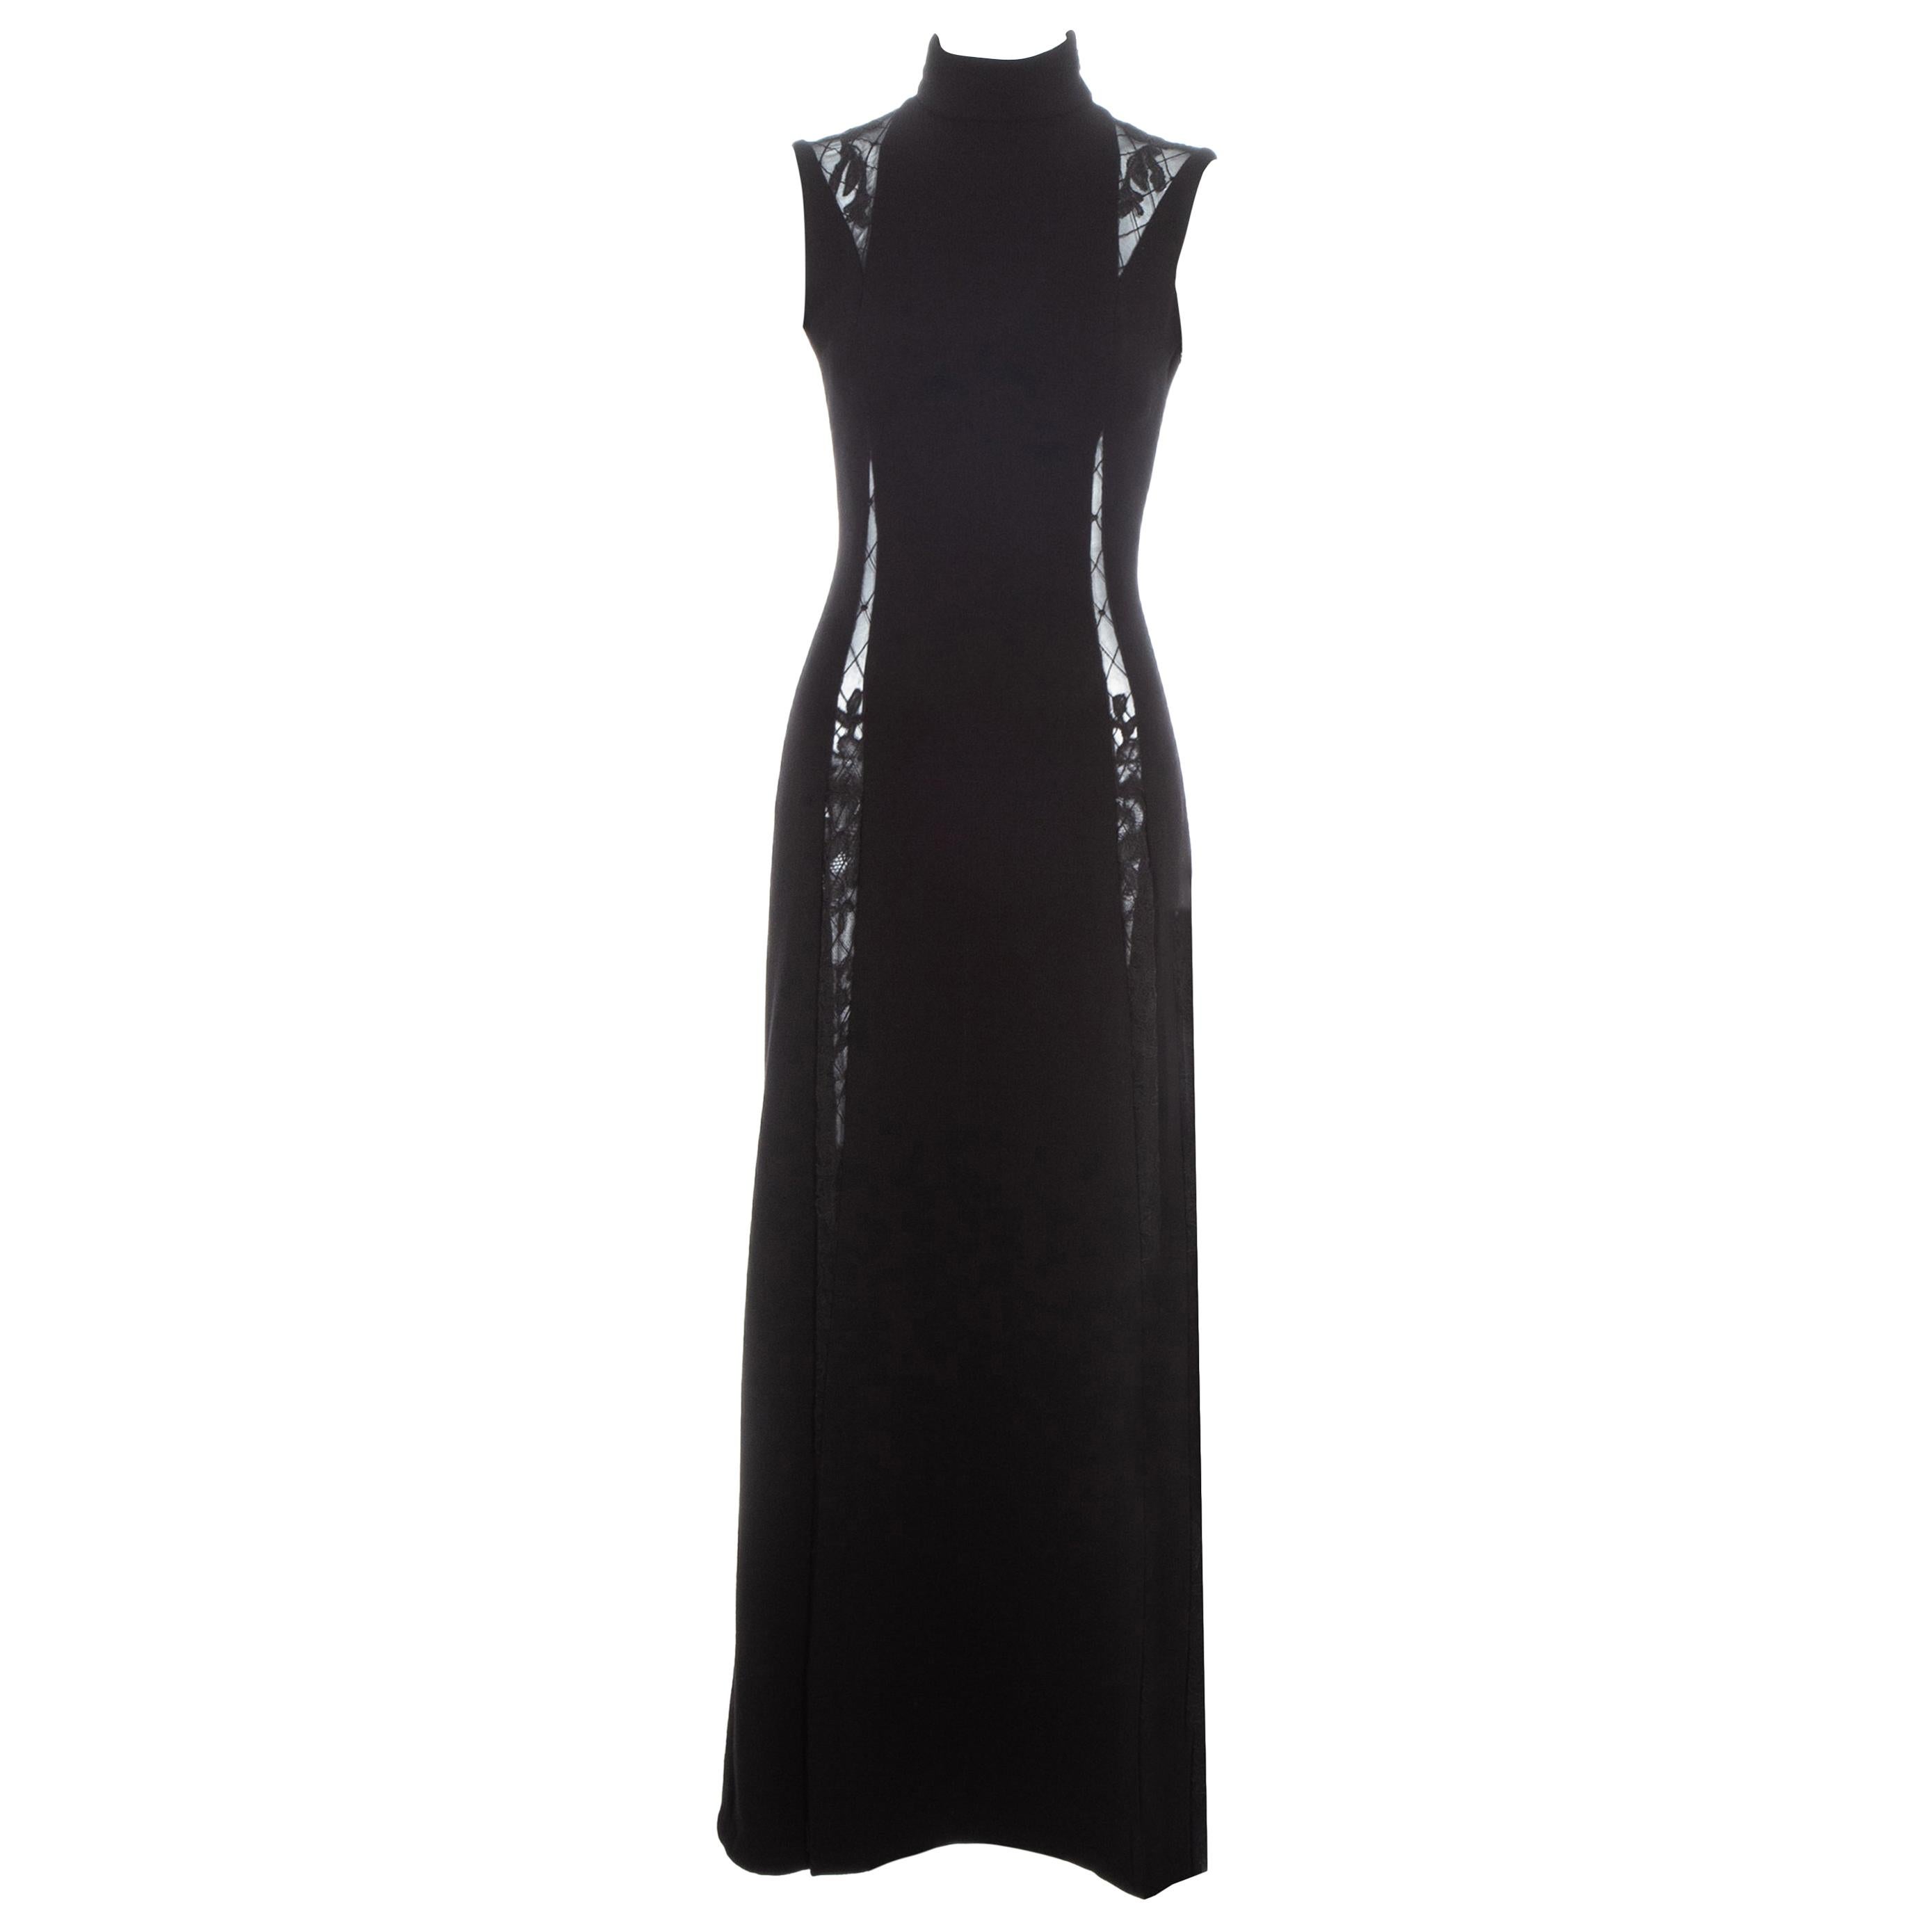 Gianni Versace black maxi dress with lace cut outs, fw 1993 For Sale